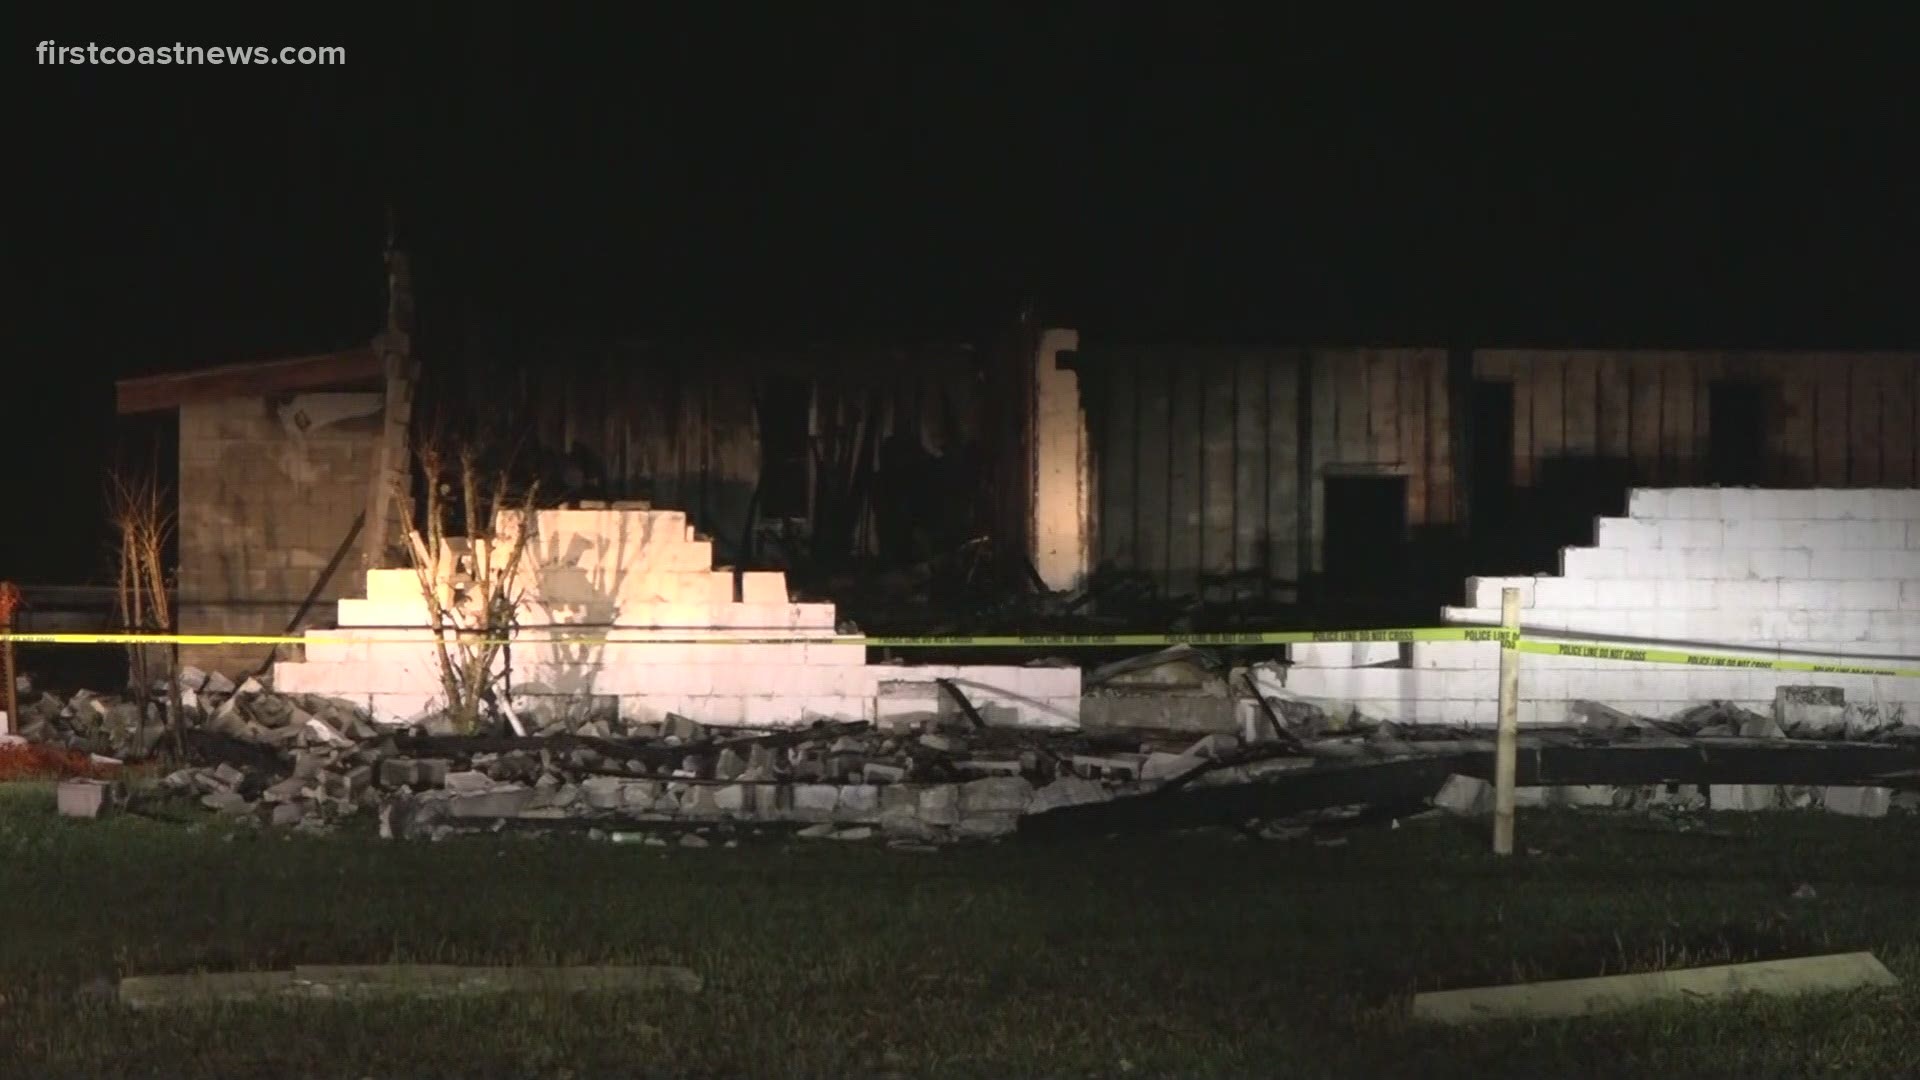 The entire structure of St. Simon Baptist Church, a historic Black church in Orange Park, was destroyed in an overnight fire.